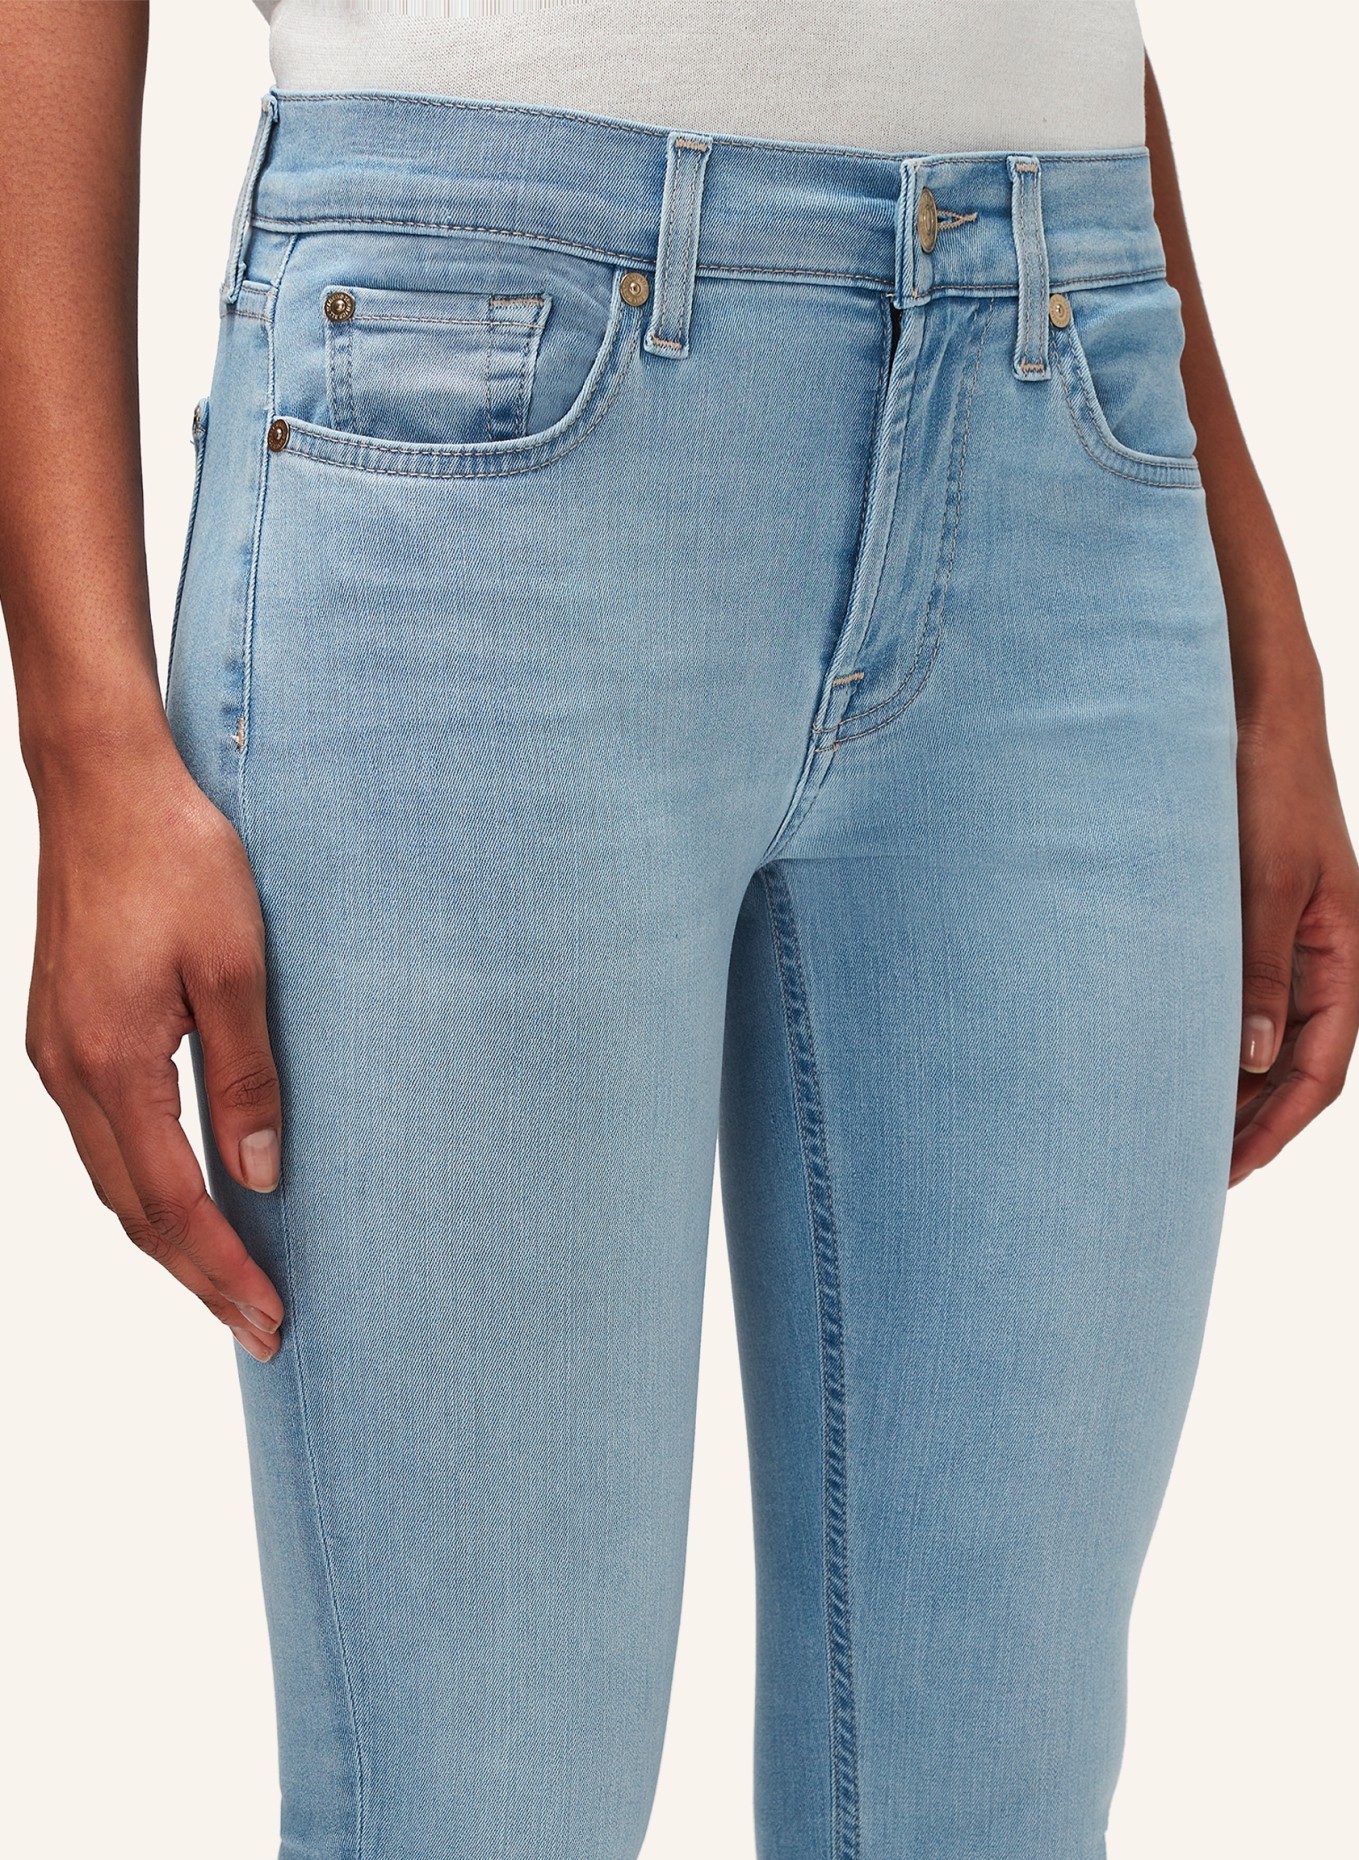 7 for all mankind Jeans THE ANKLE SKINNY Skinny Fit, Farbe: BLAU (Bild 3)